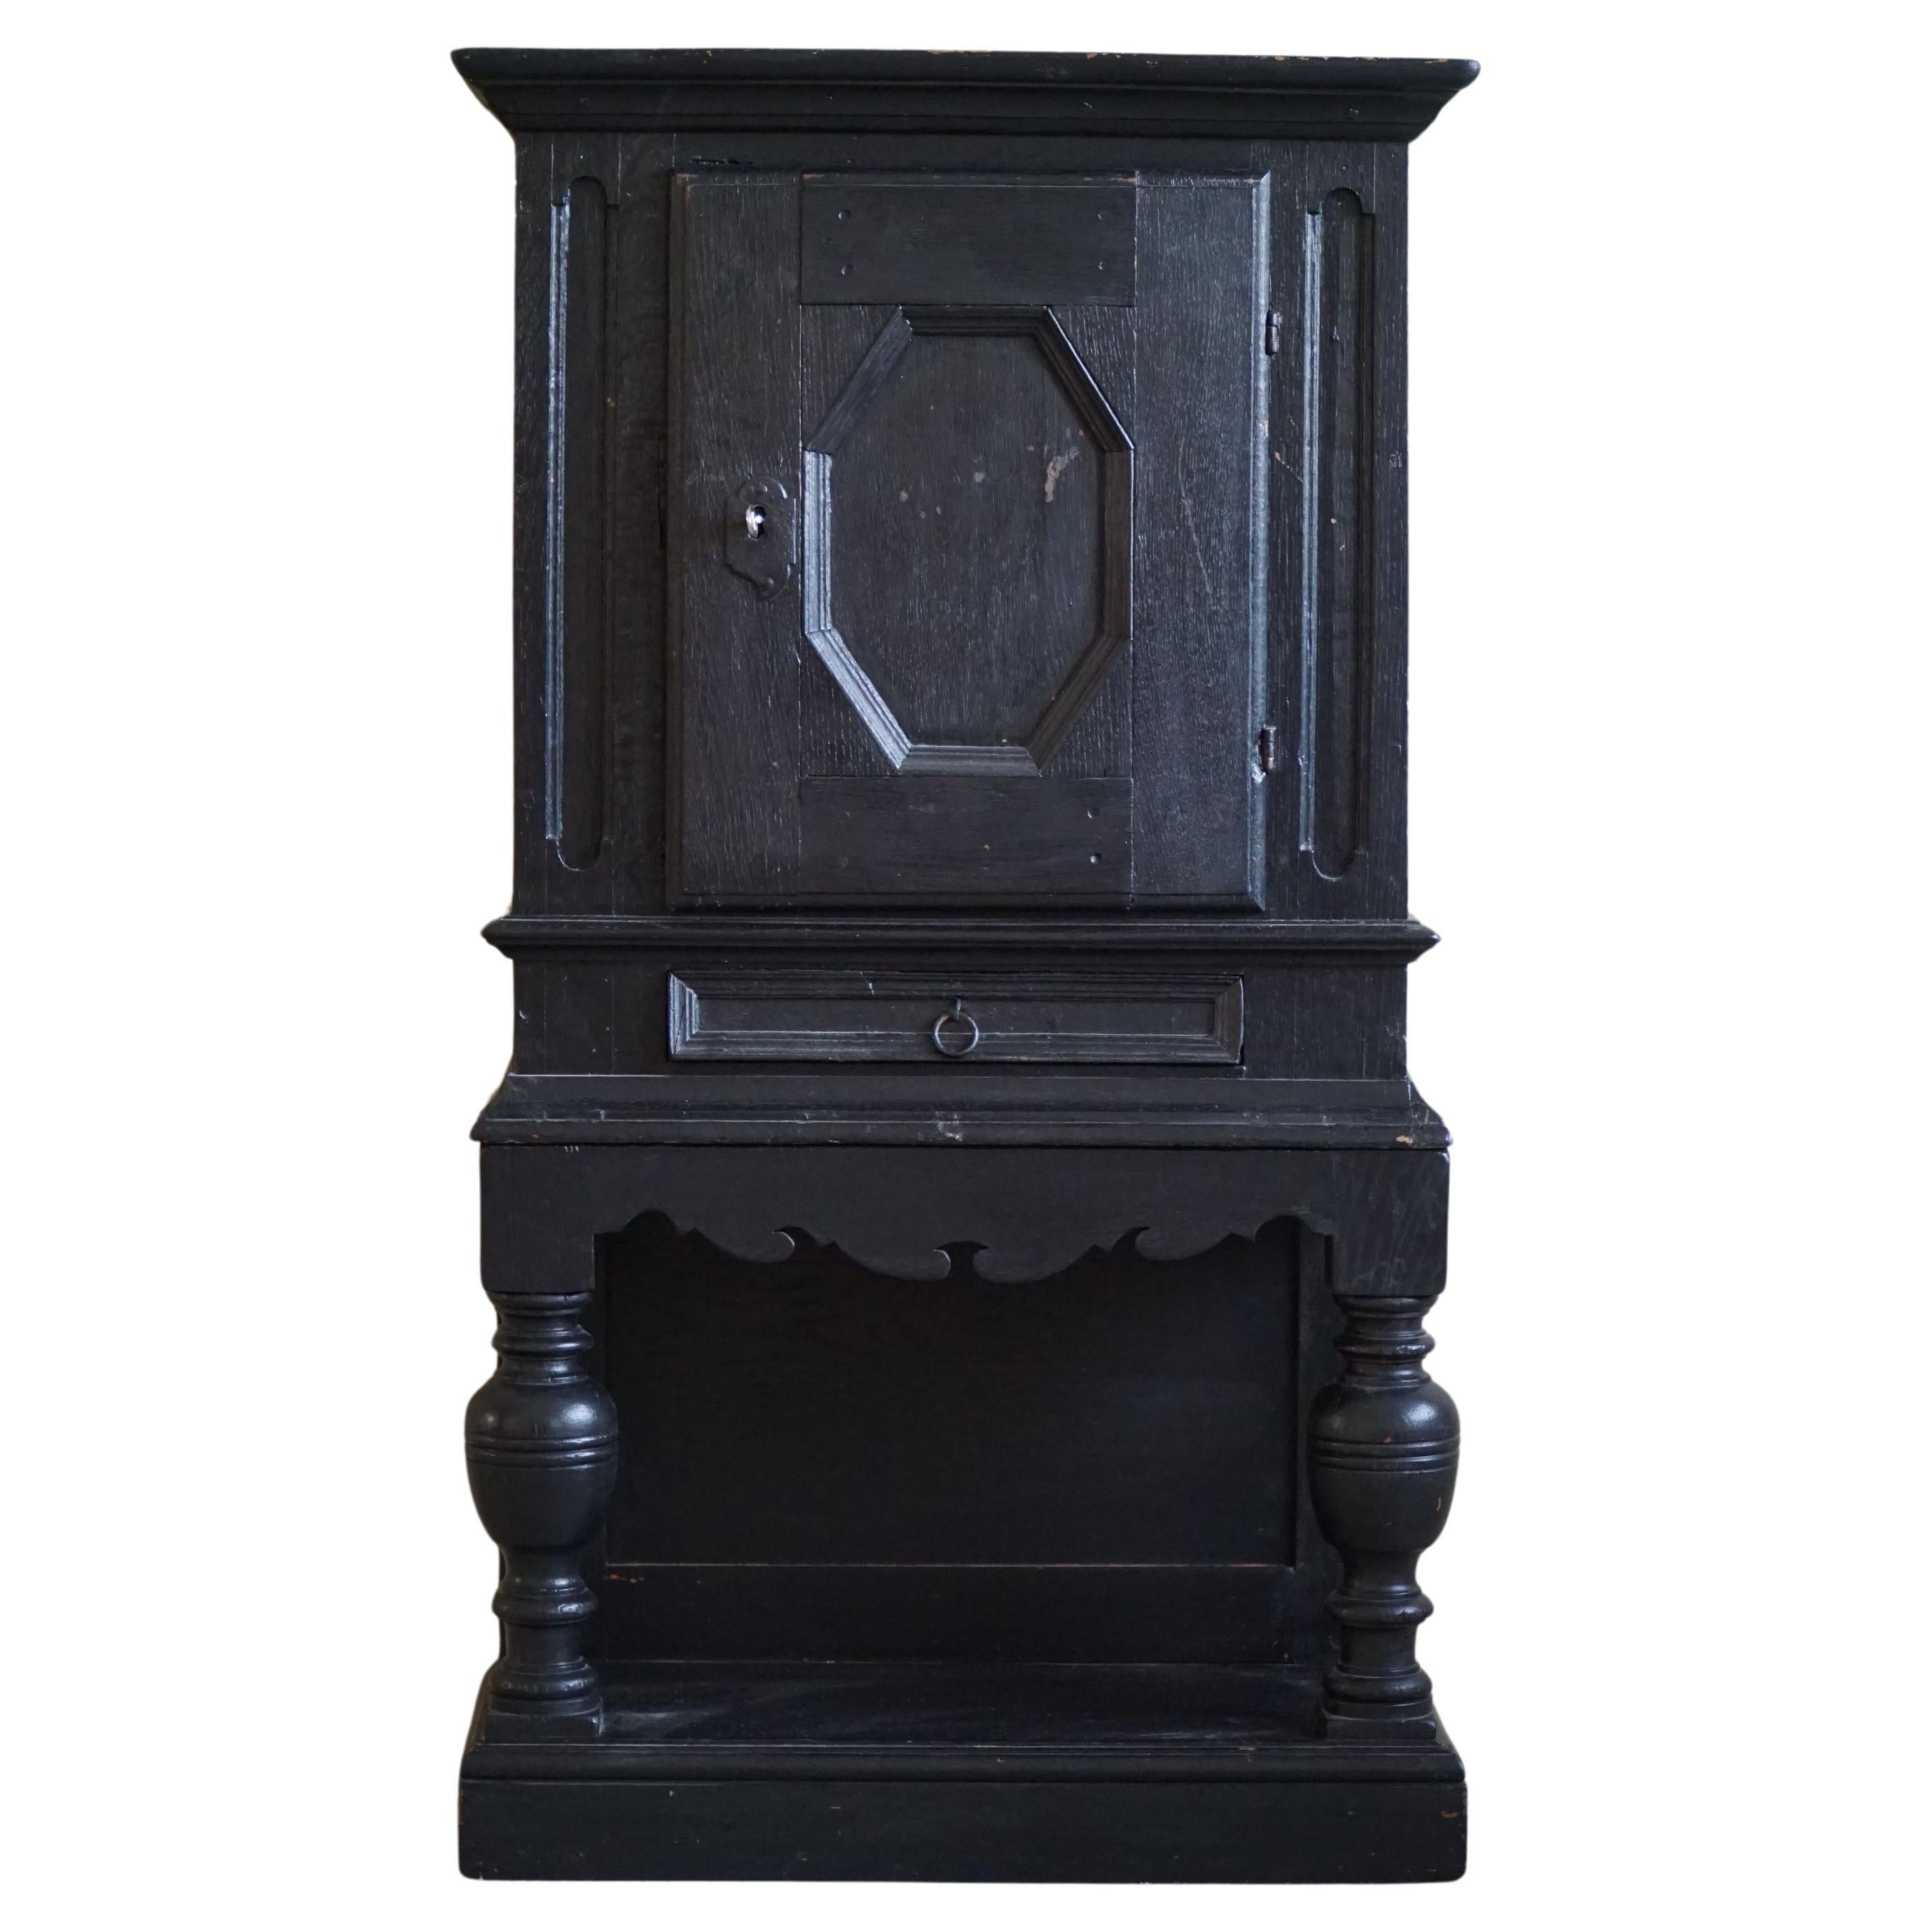 18th Century, Antique Black Painted Cabinet by a Danish Cabinetmaker, Baroque For Sale